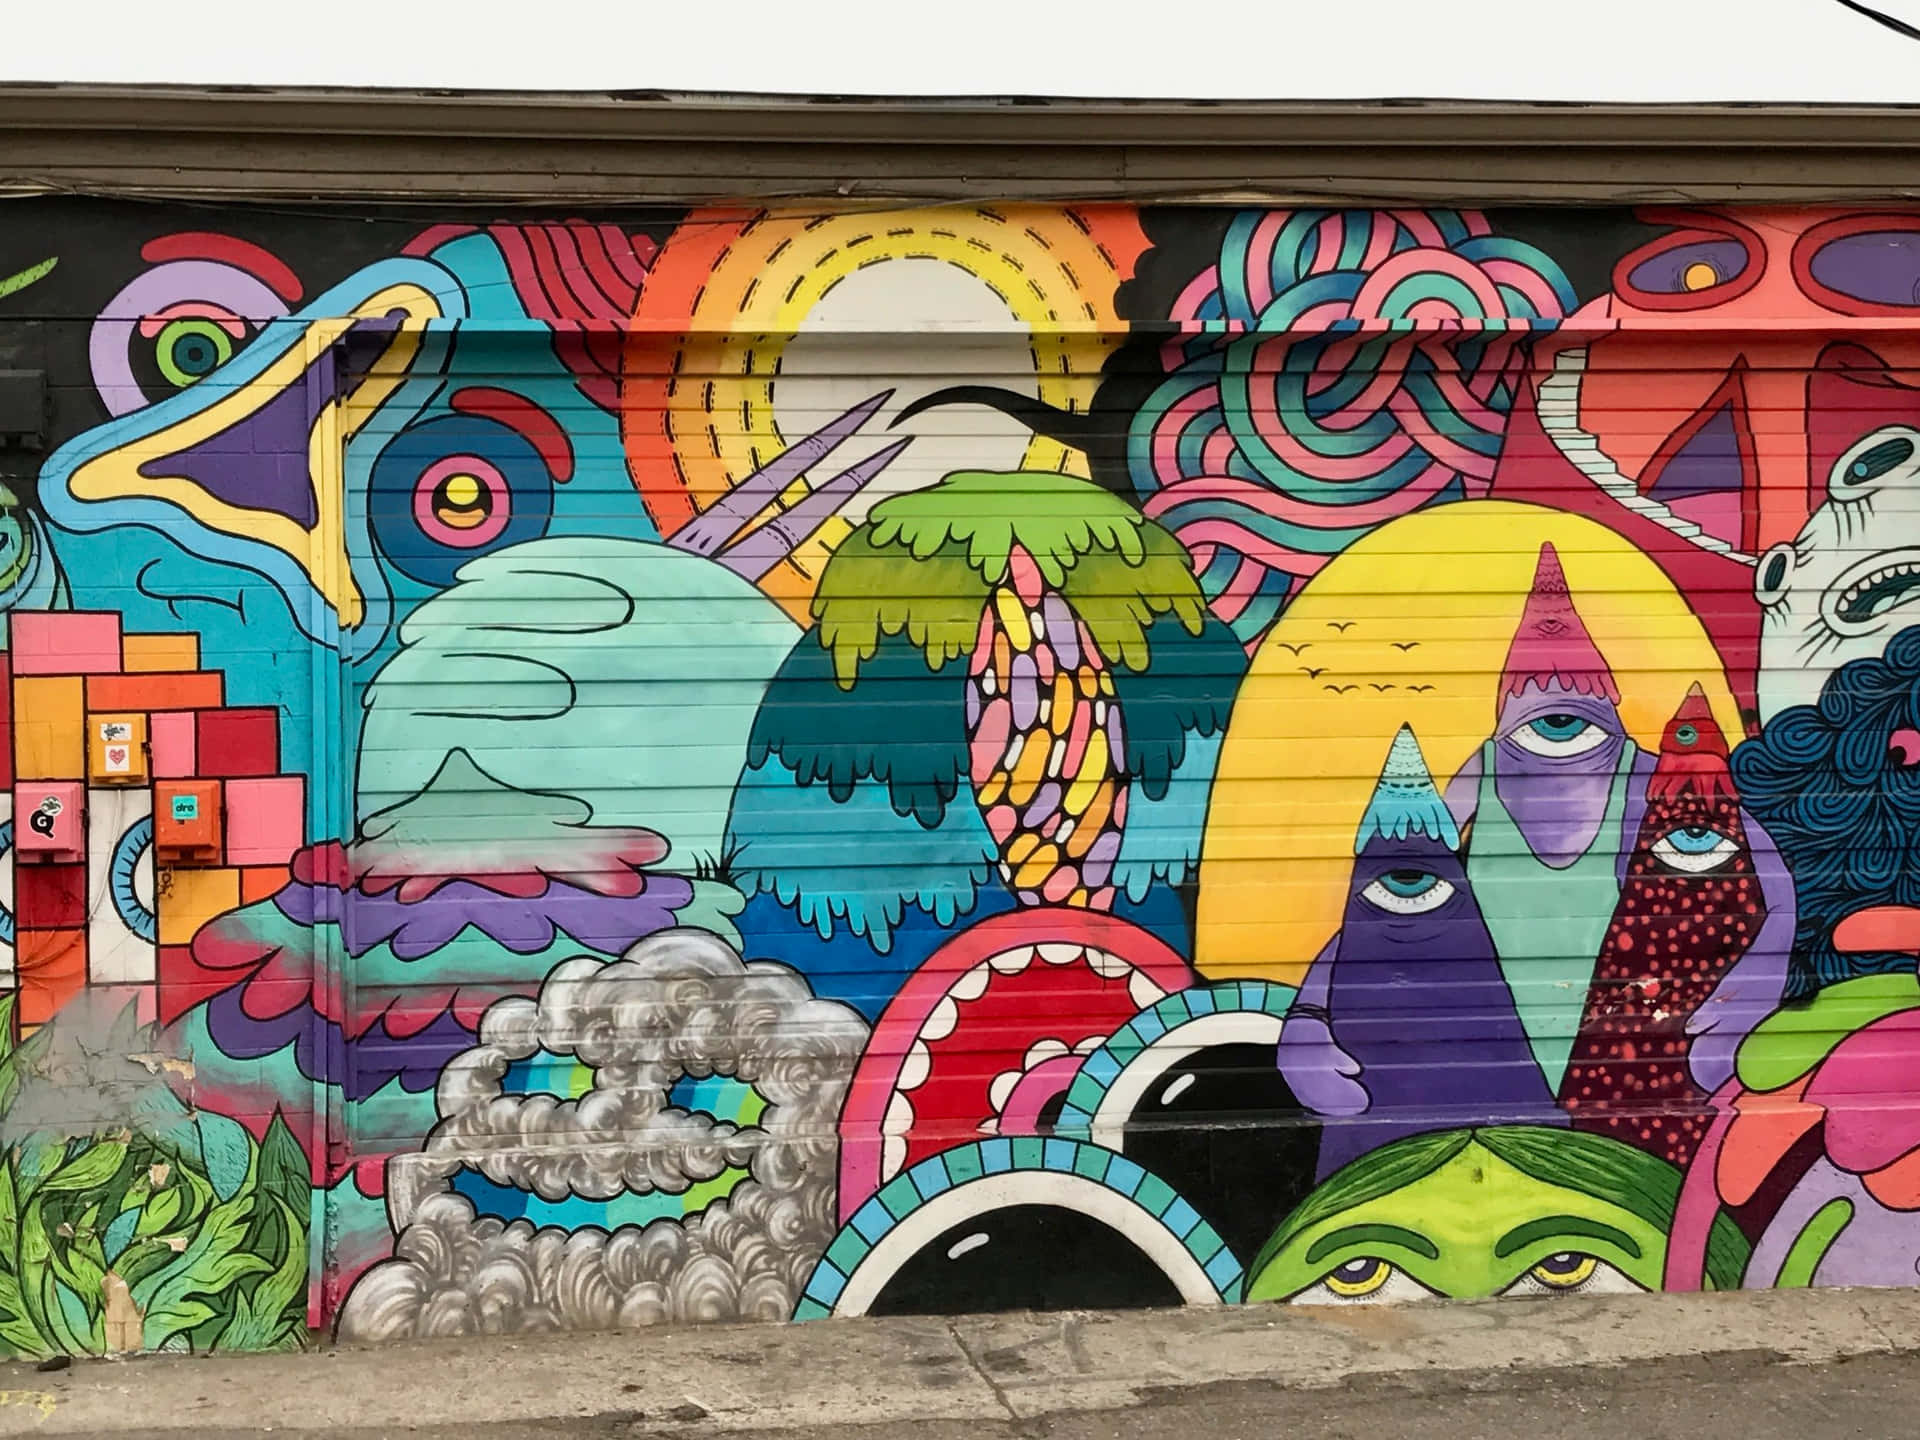 A Colorful Mural On A Wall